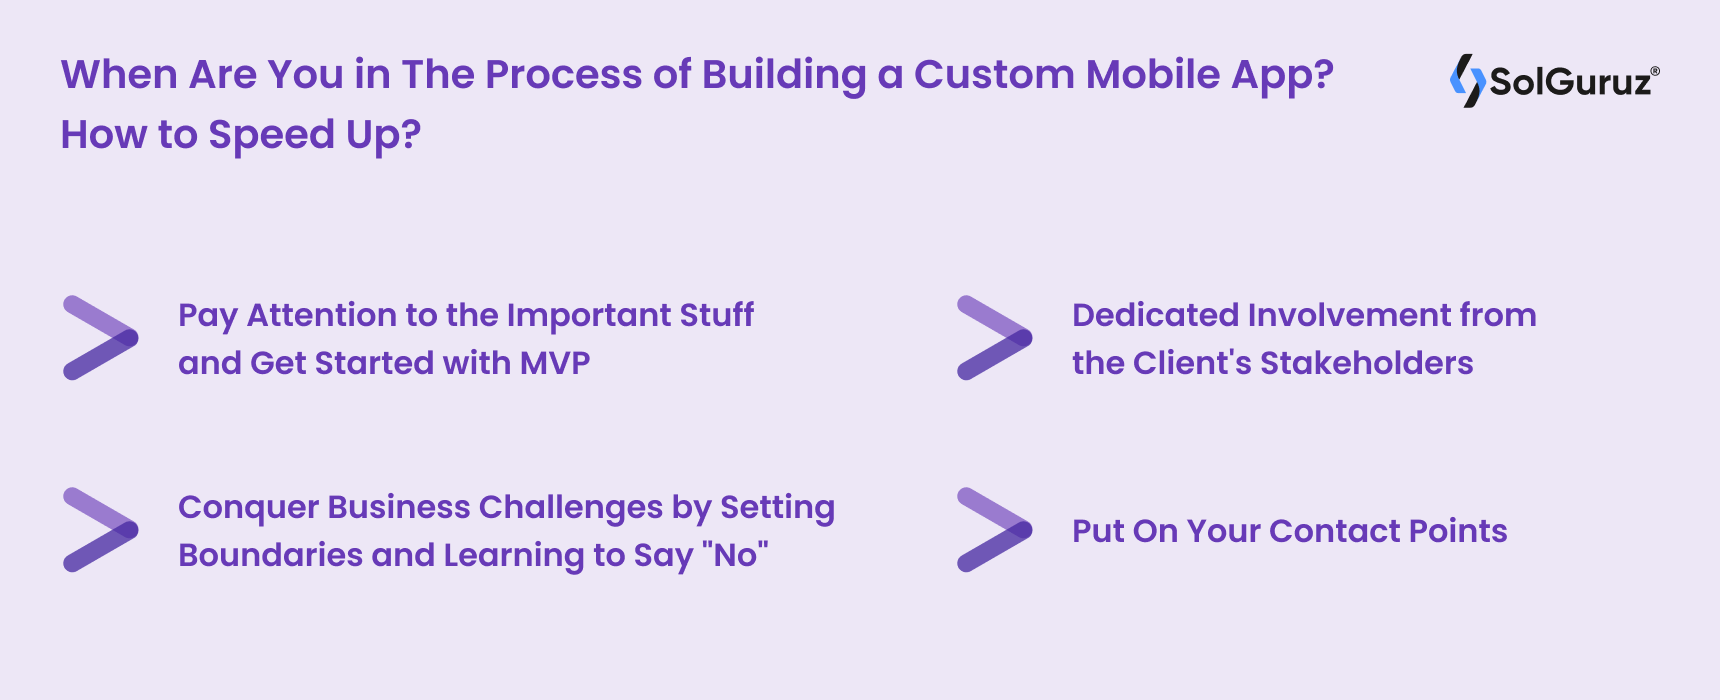 When Are You in The Process of Building a Custom Mobile App - How to Speed Up